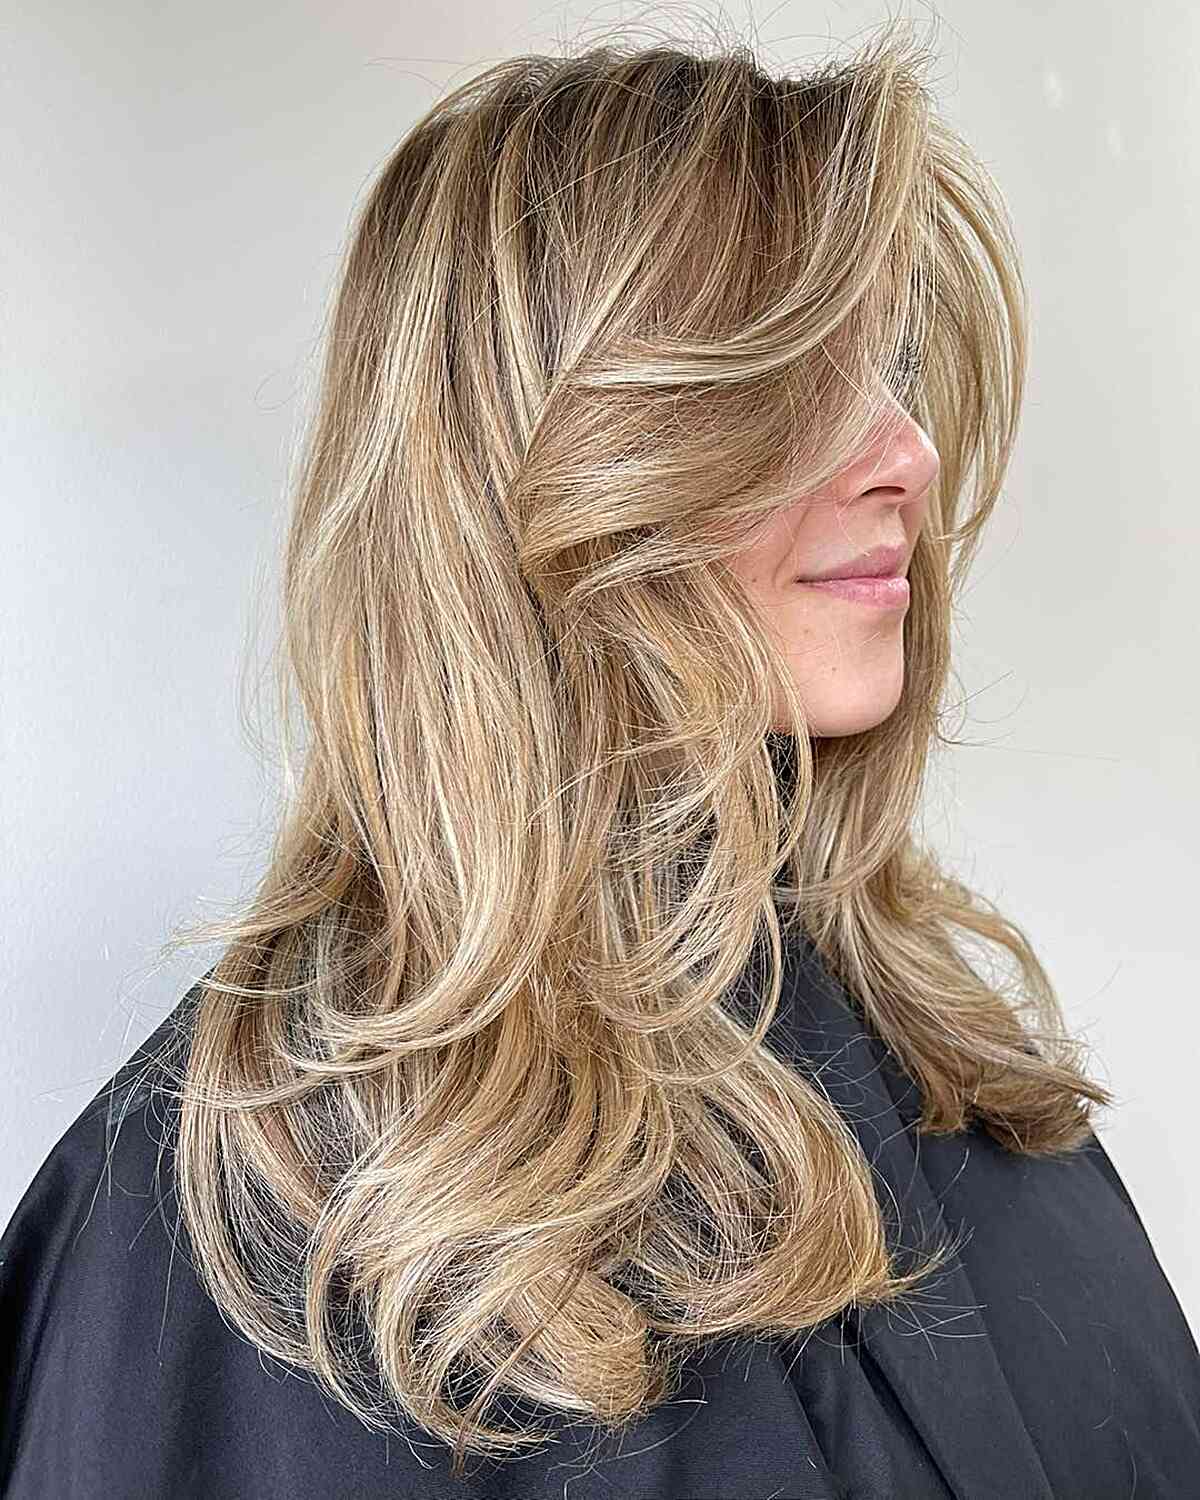 Multi-Layered Medium Butterfly Hair with Honey Balayage Highlights